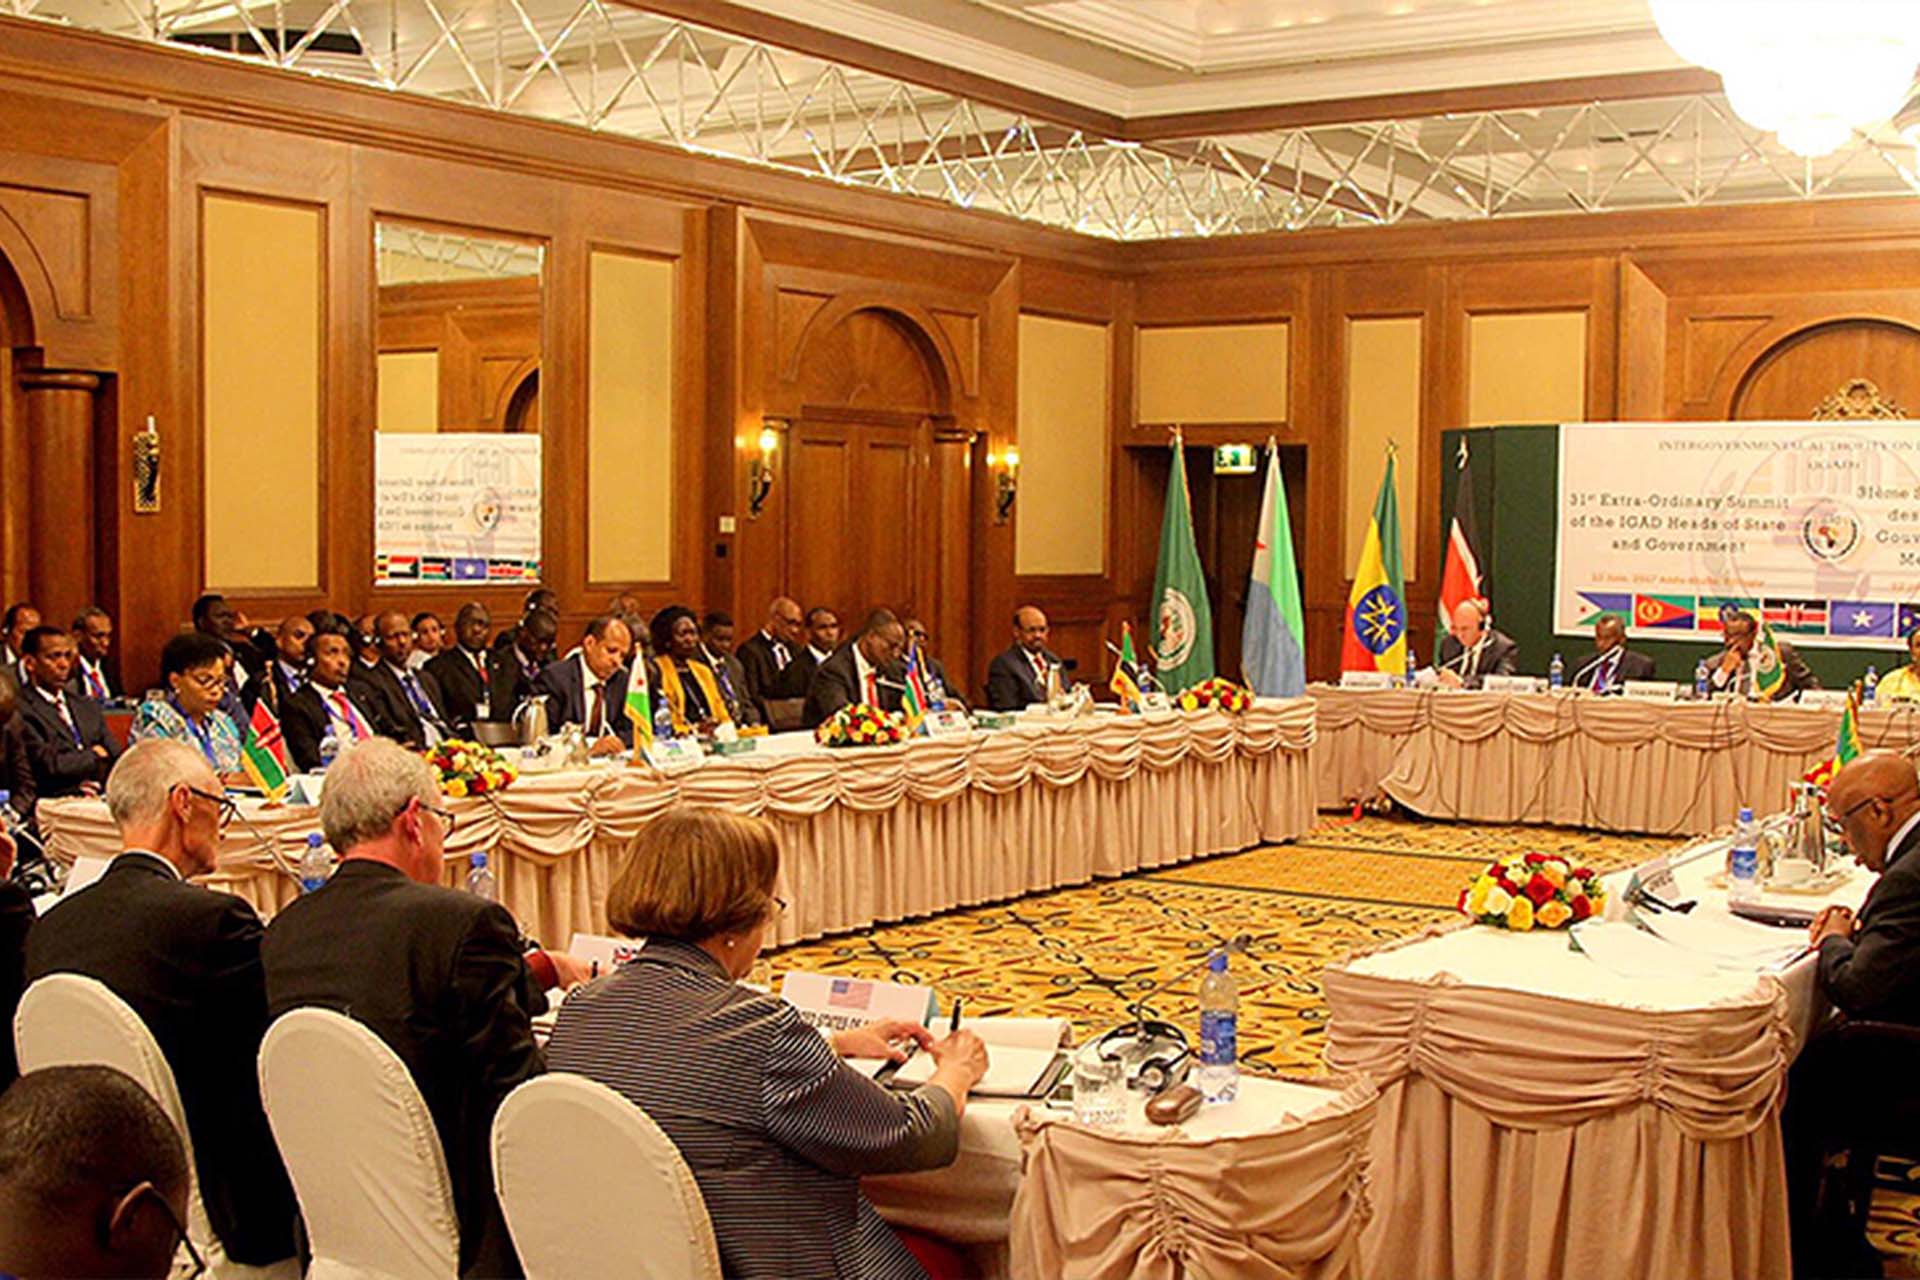 COMMUNIQUÉ OF THE 31ST EXTRA-ORDINARY SUMMIT OF IGAD ASSEMBLY OF HEADS OF STATE AND GOVERNMENT ON SOUTH SUDAN